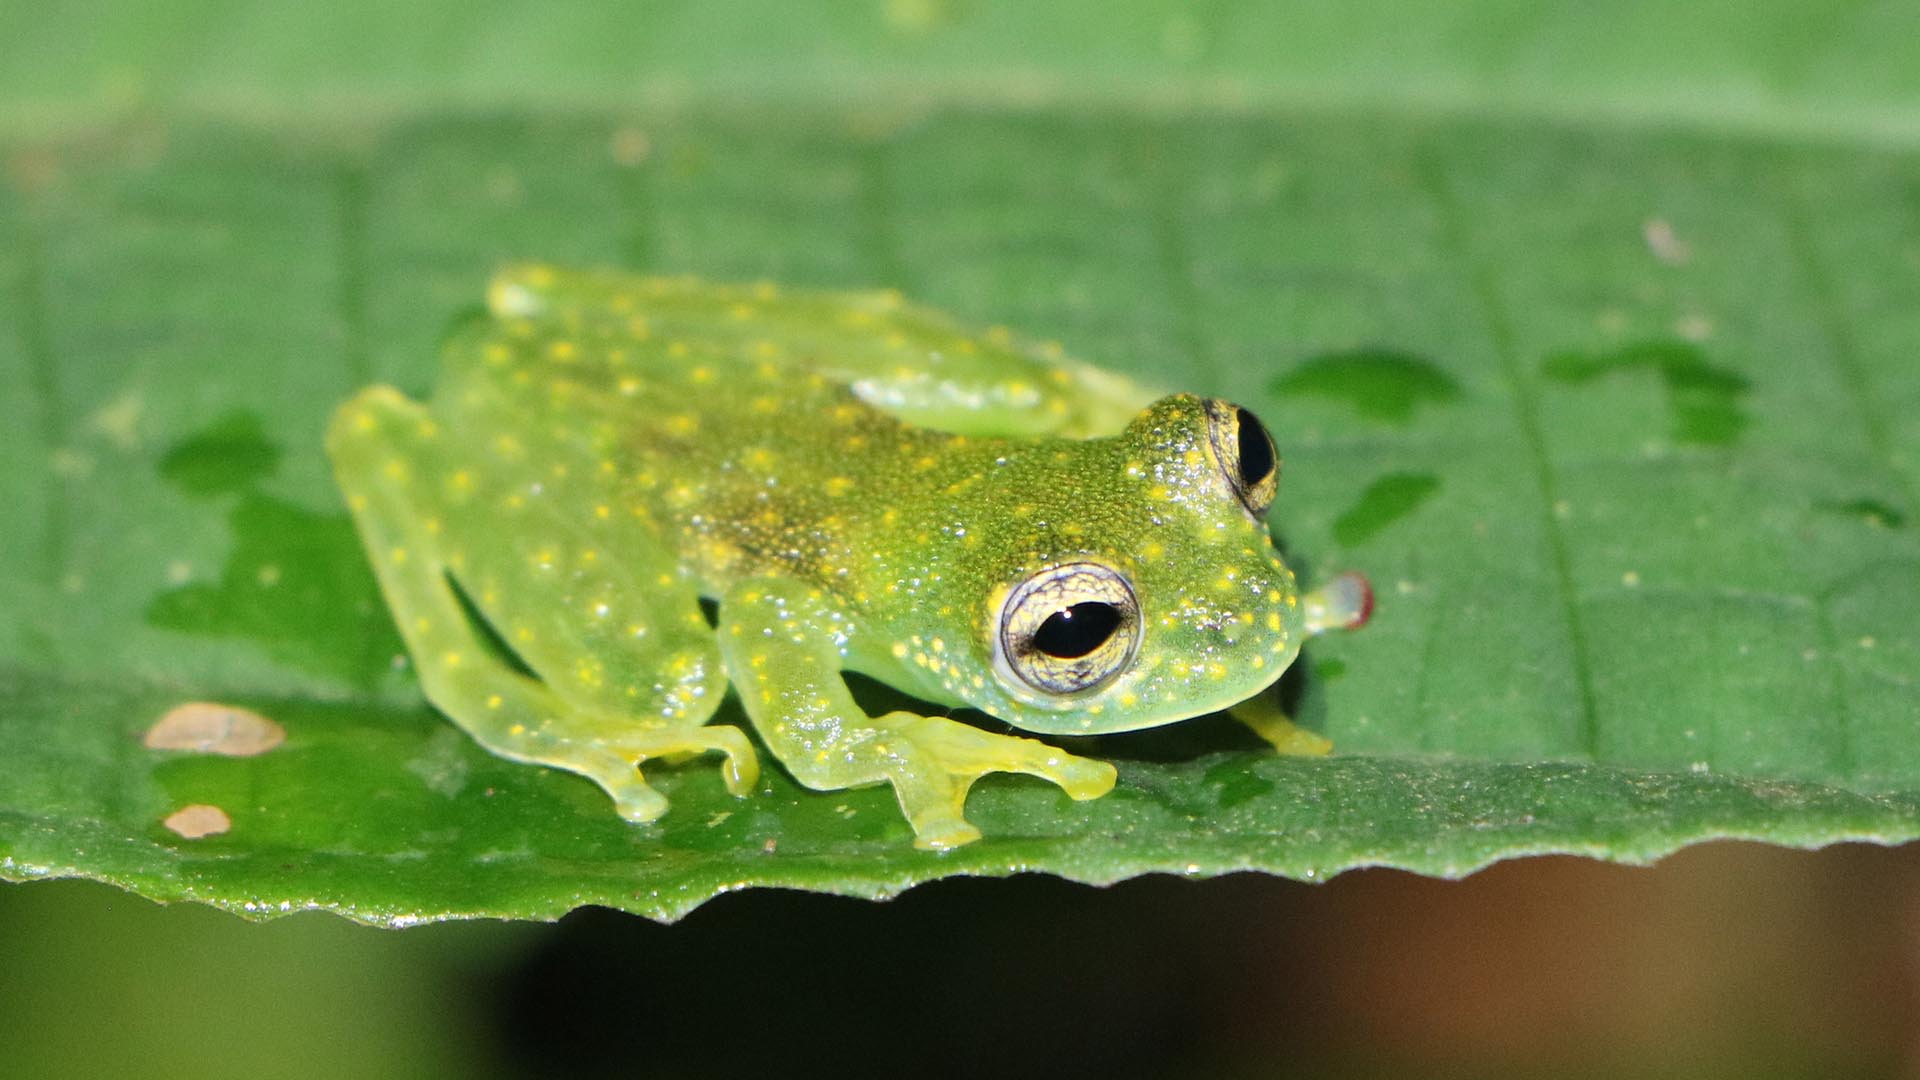 Join the 2022 SAVE THE FROGS! Costa Rica Ecotour For Families